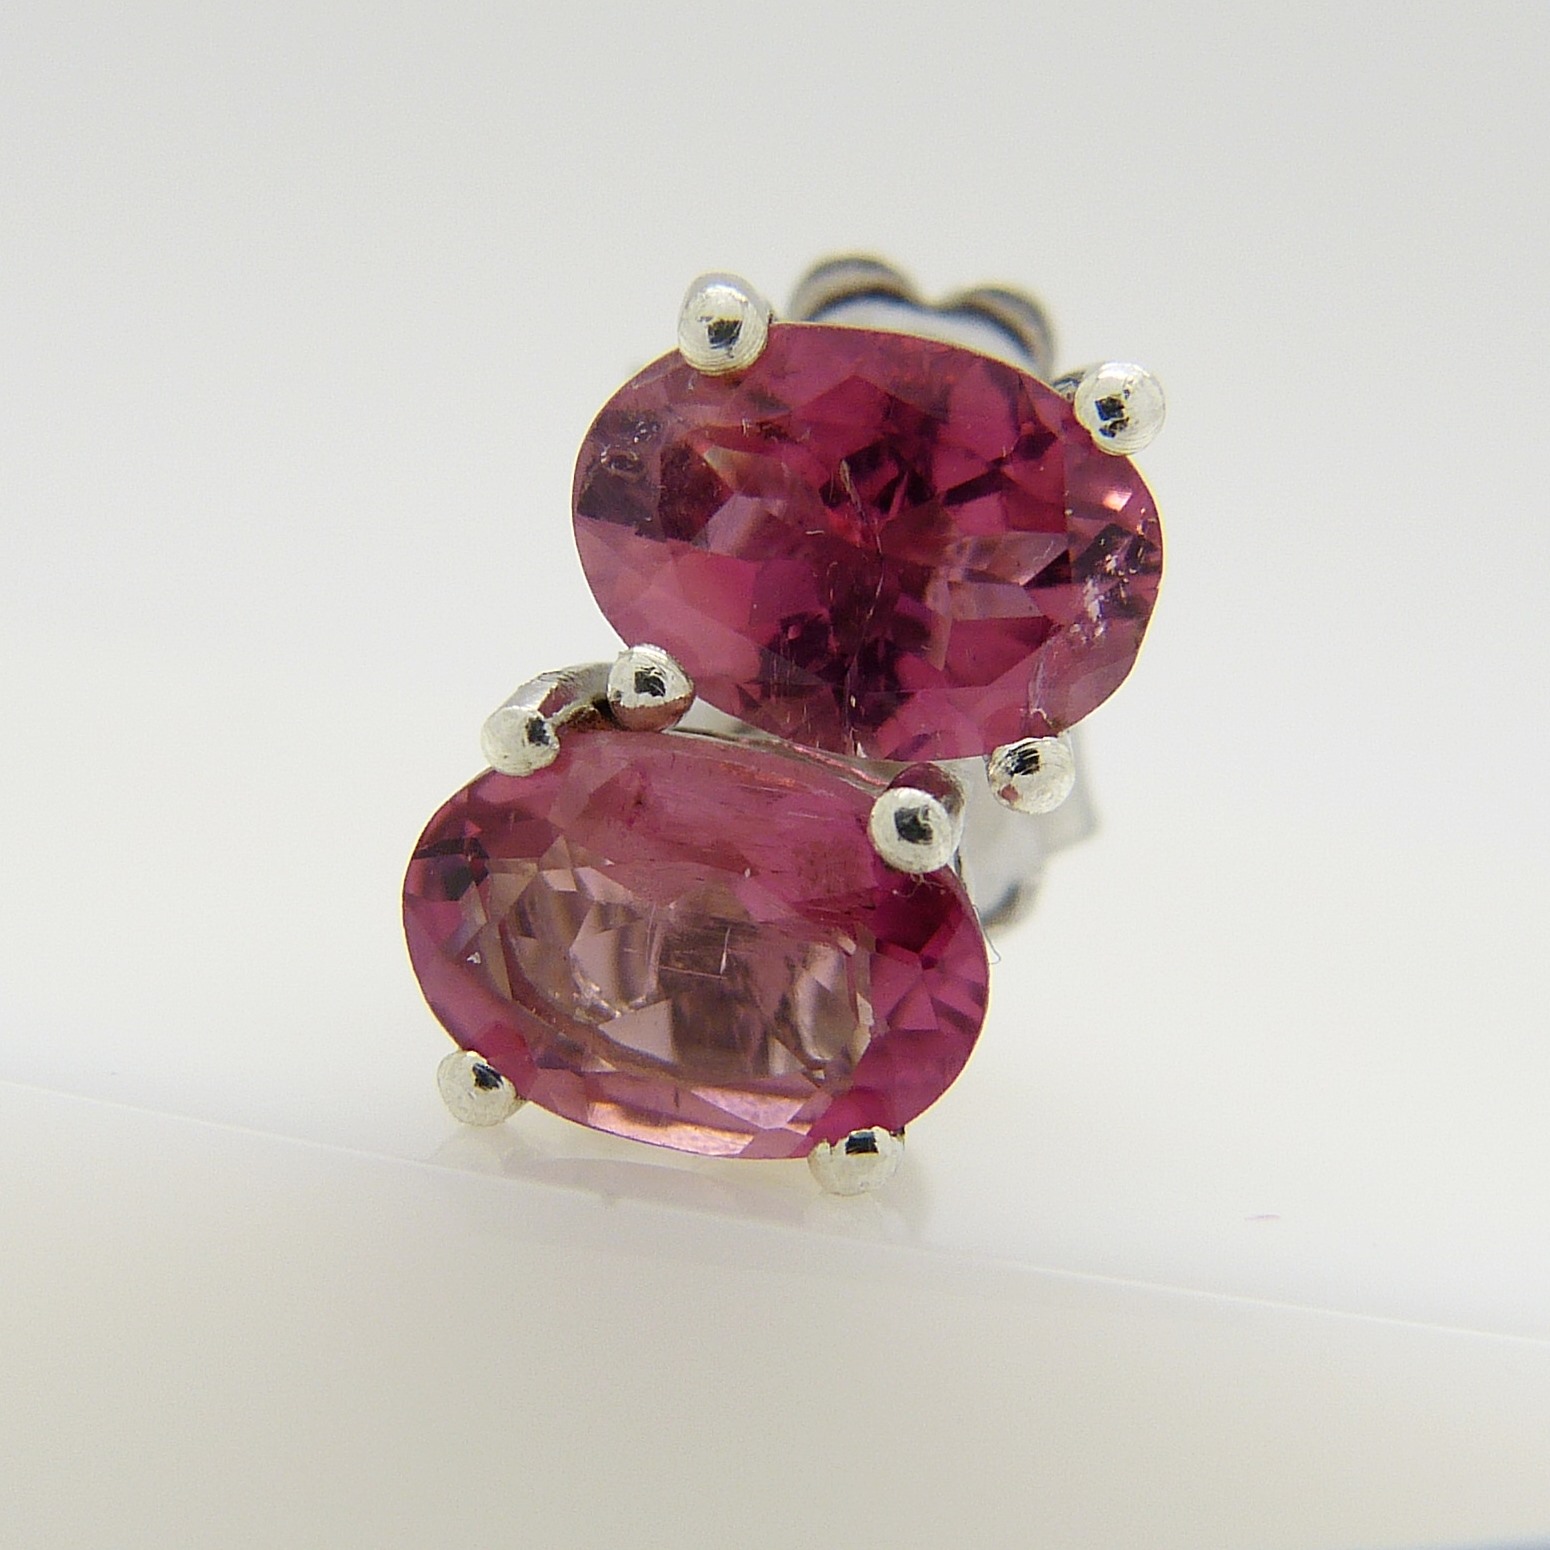 A pair of silver ear studs set with pink tourmalines, 1.30 carats (approx).